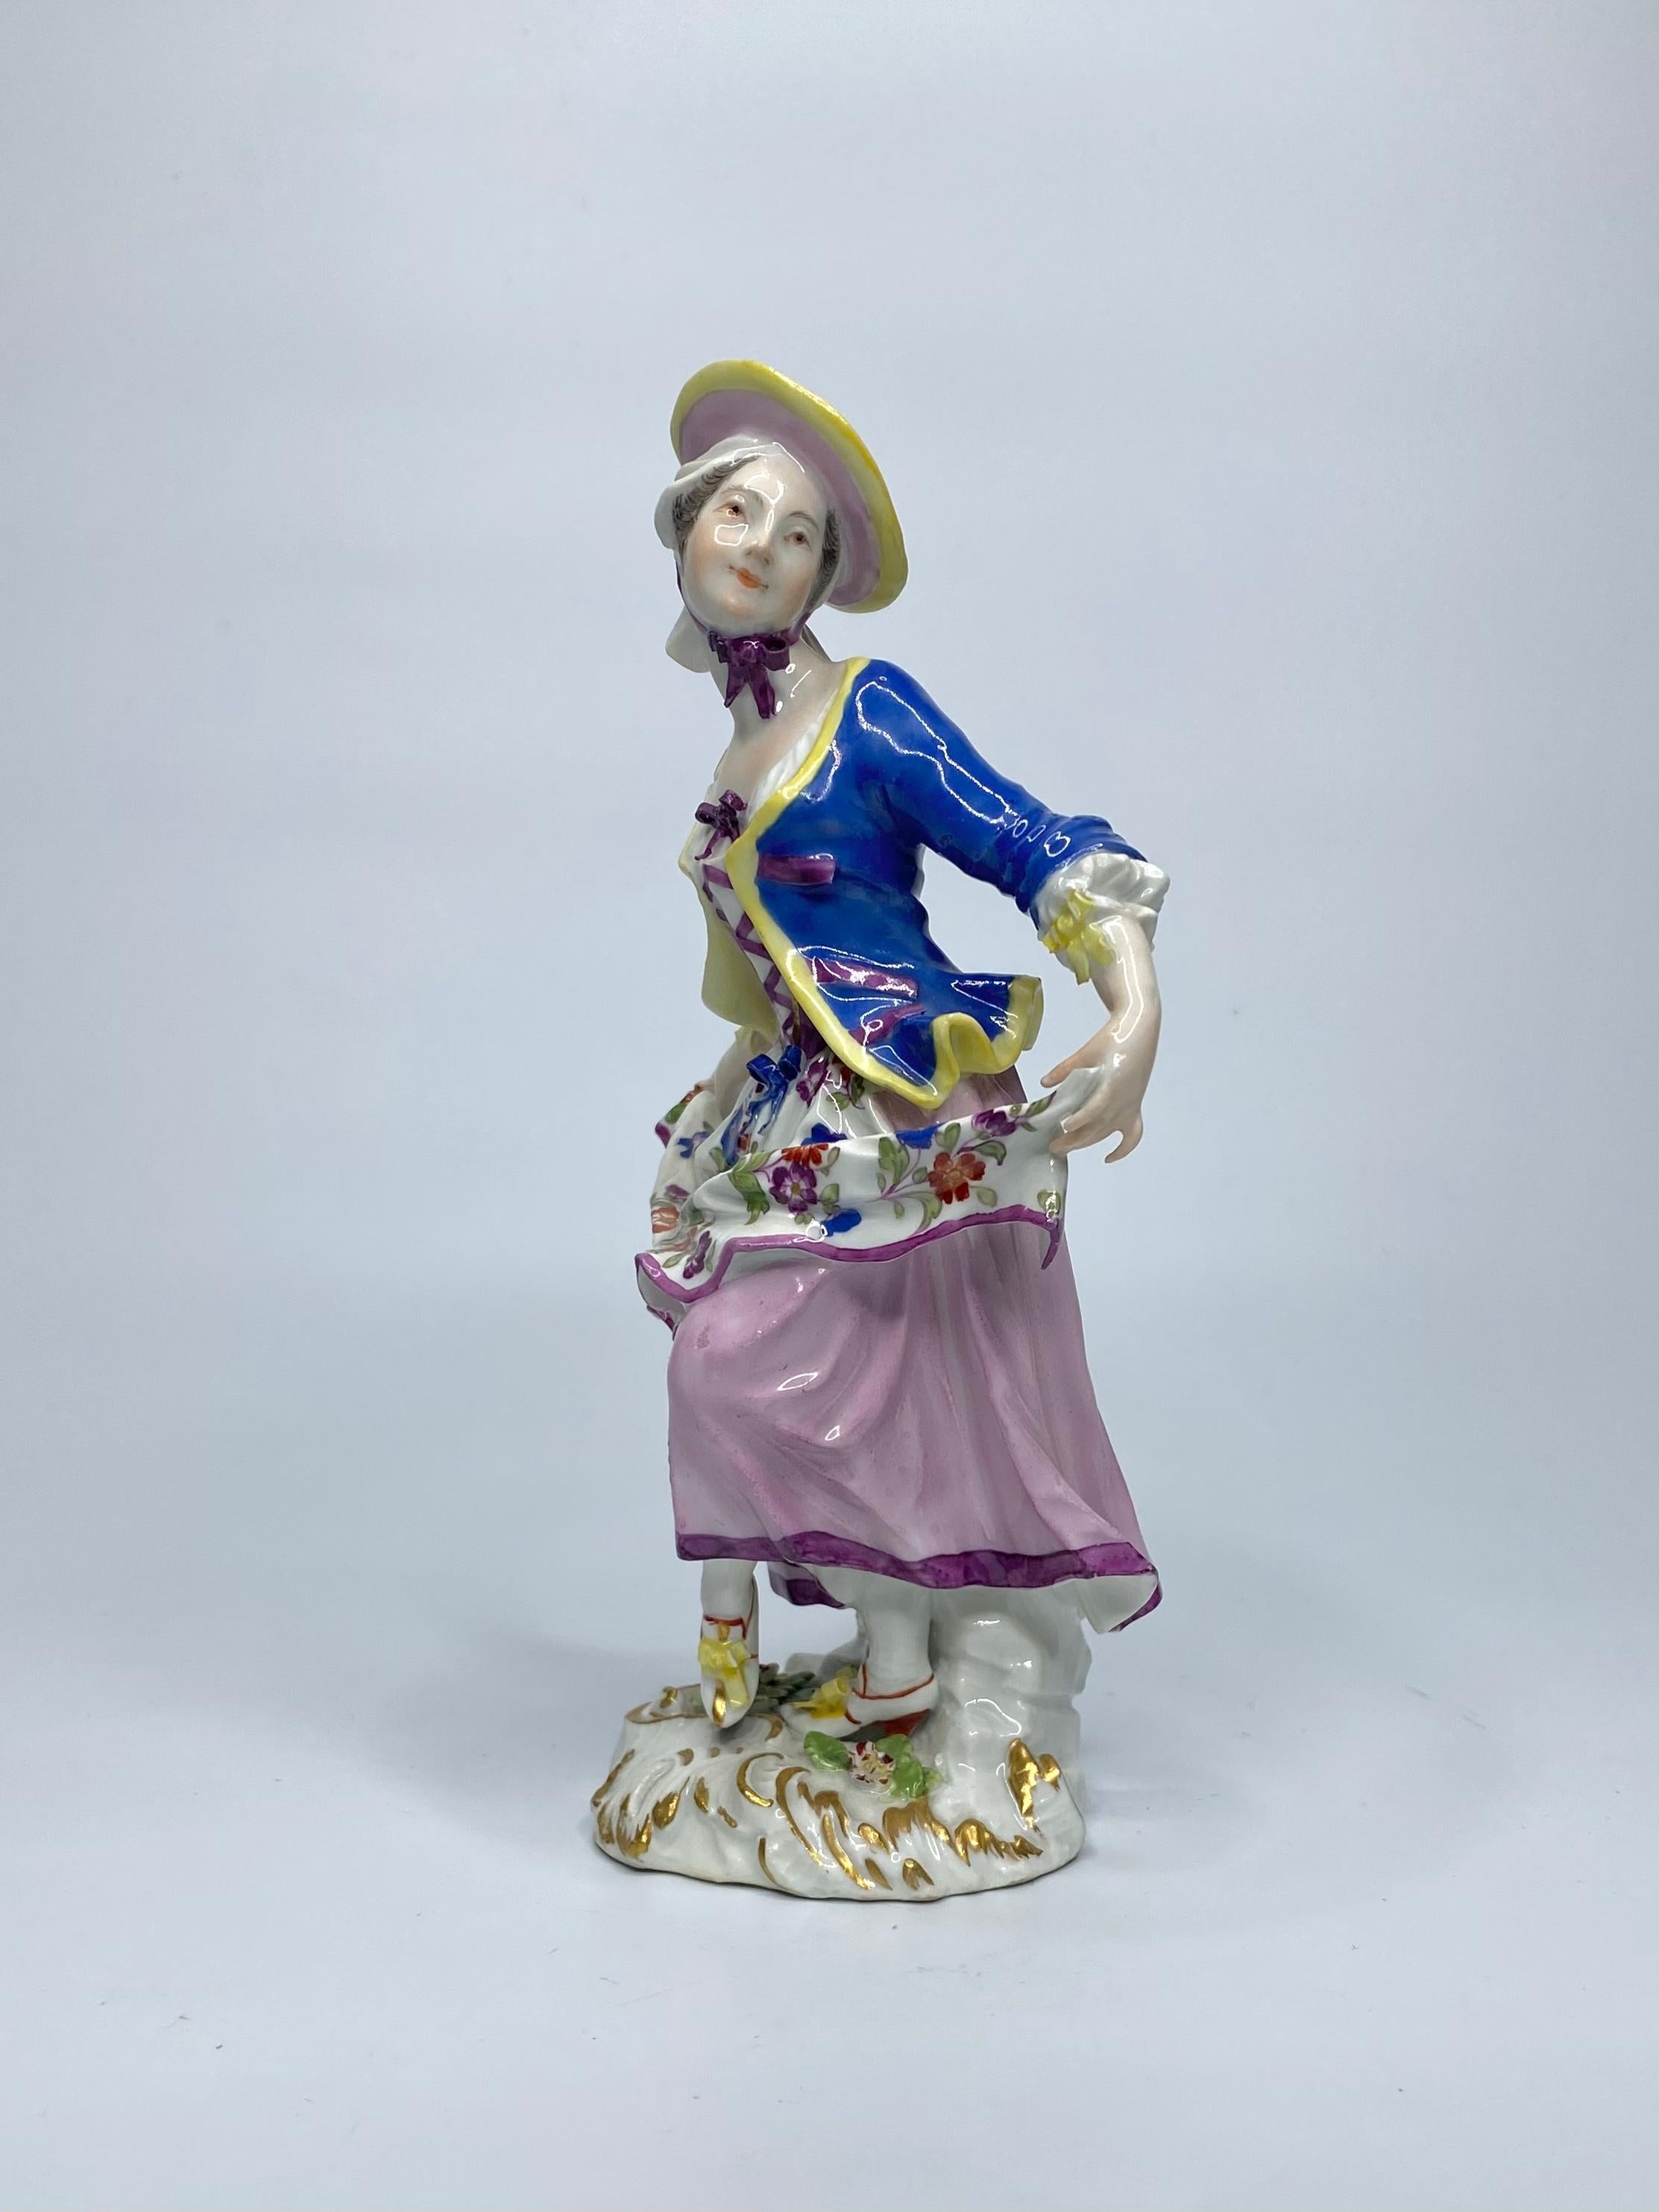 Meissen porcelain figure, ‘Cris de Paris’ series, circa  1755. Finely modelled by Johann Joachim Kändler, as the ‘Bakers Companion’ – the young dancing girl, dressed in 18th century costume, holding the hems of her ‘Indianische Blumen’ decorated